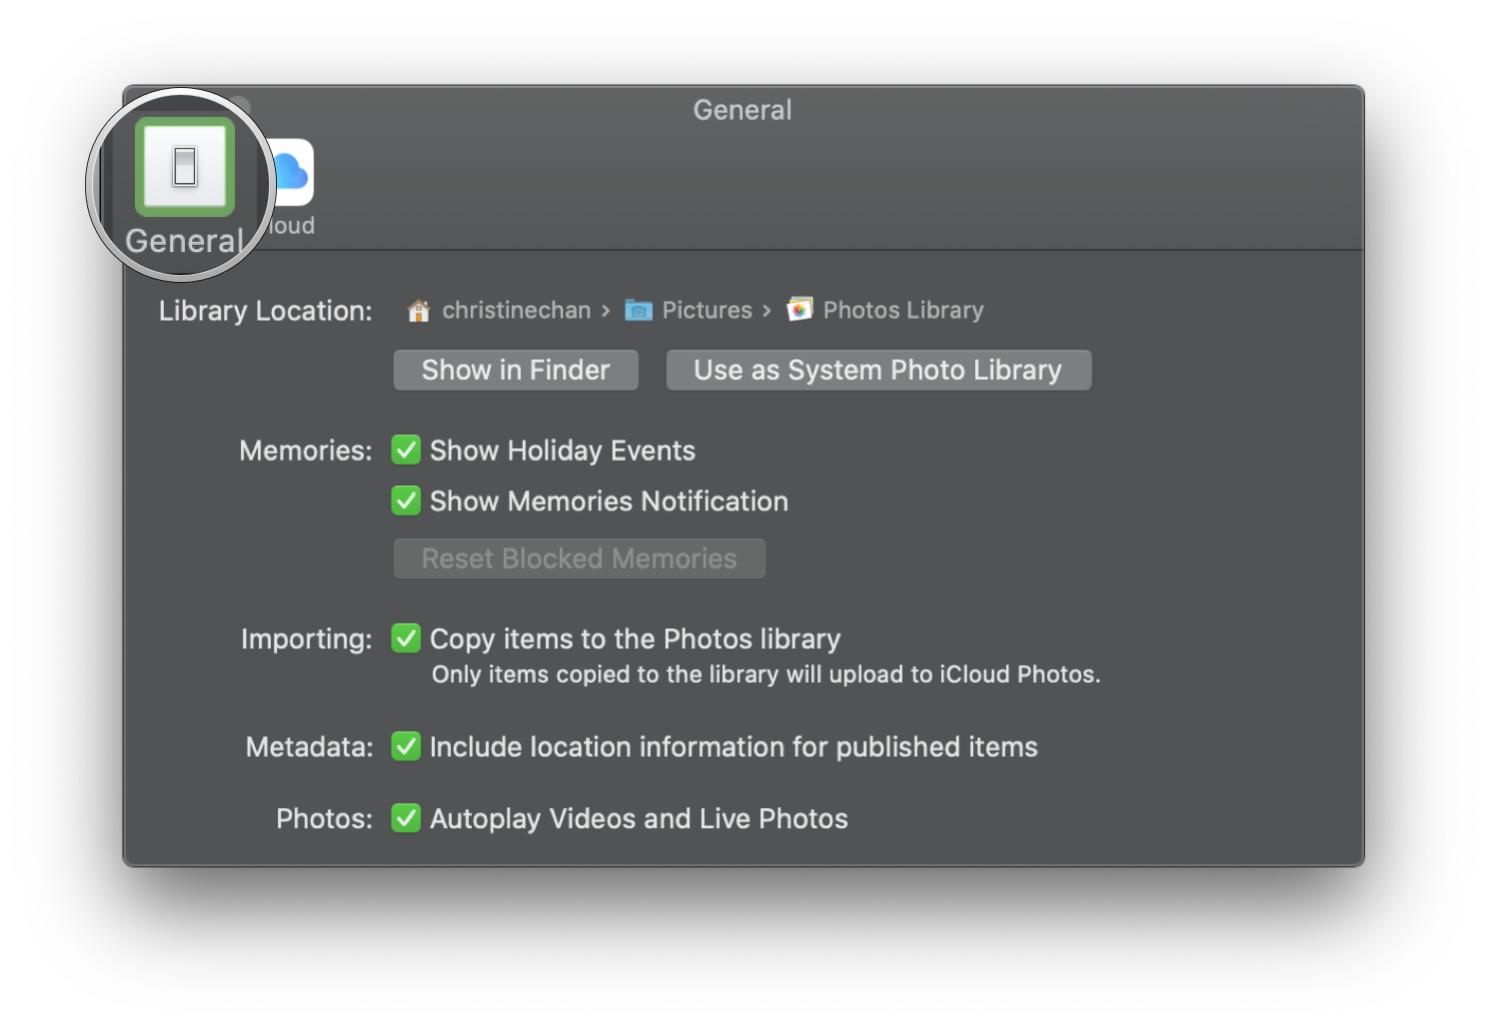 How to use iCloud Photo Library on Photos for Mac by showing steps: In Preferences, click General